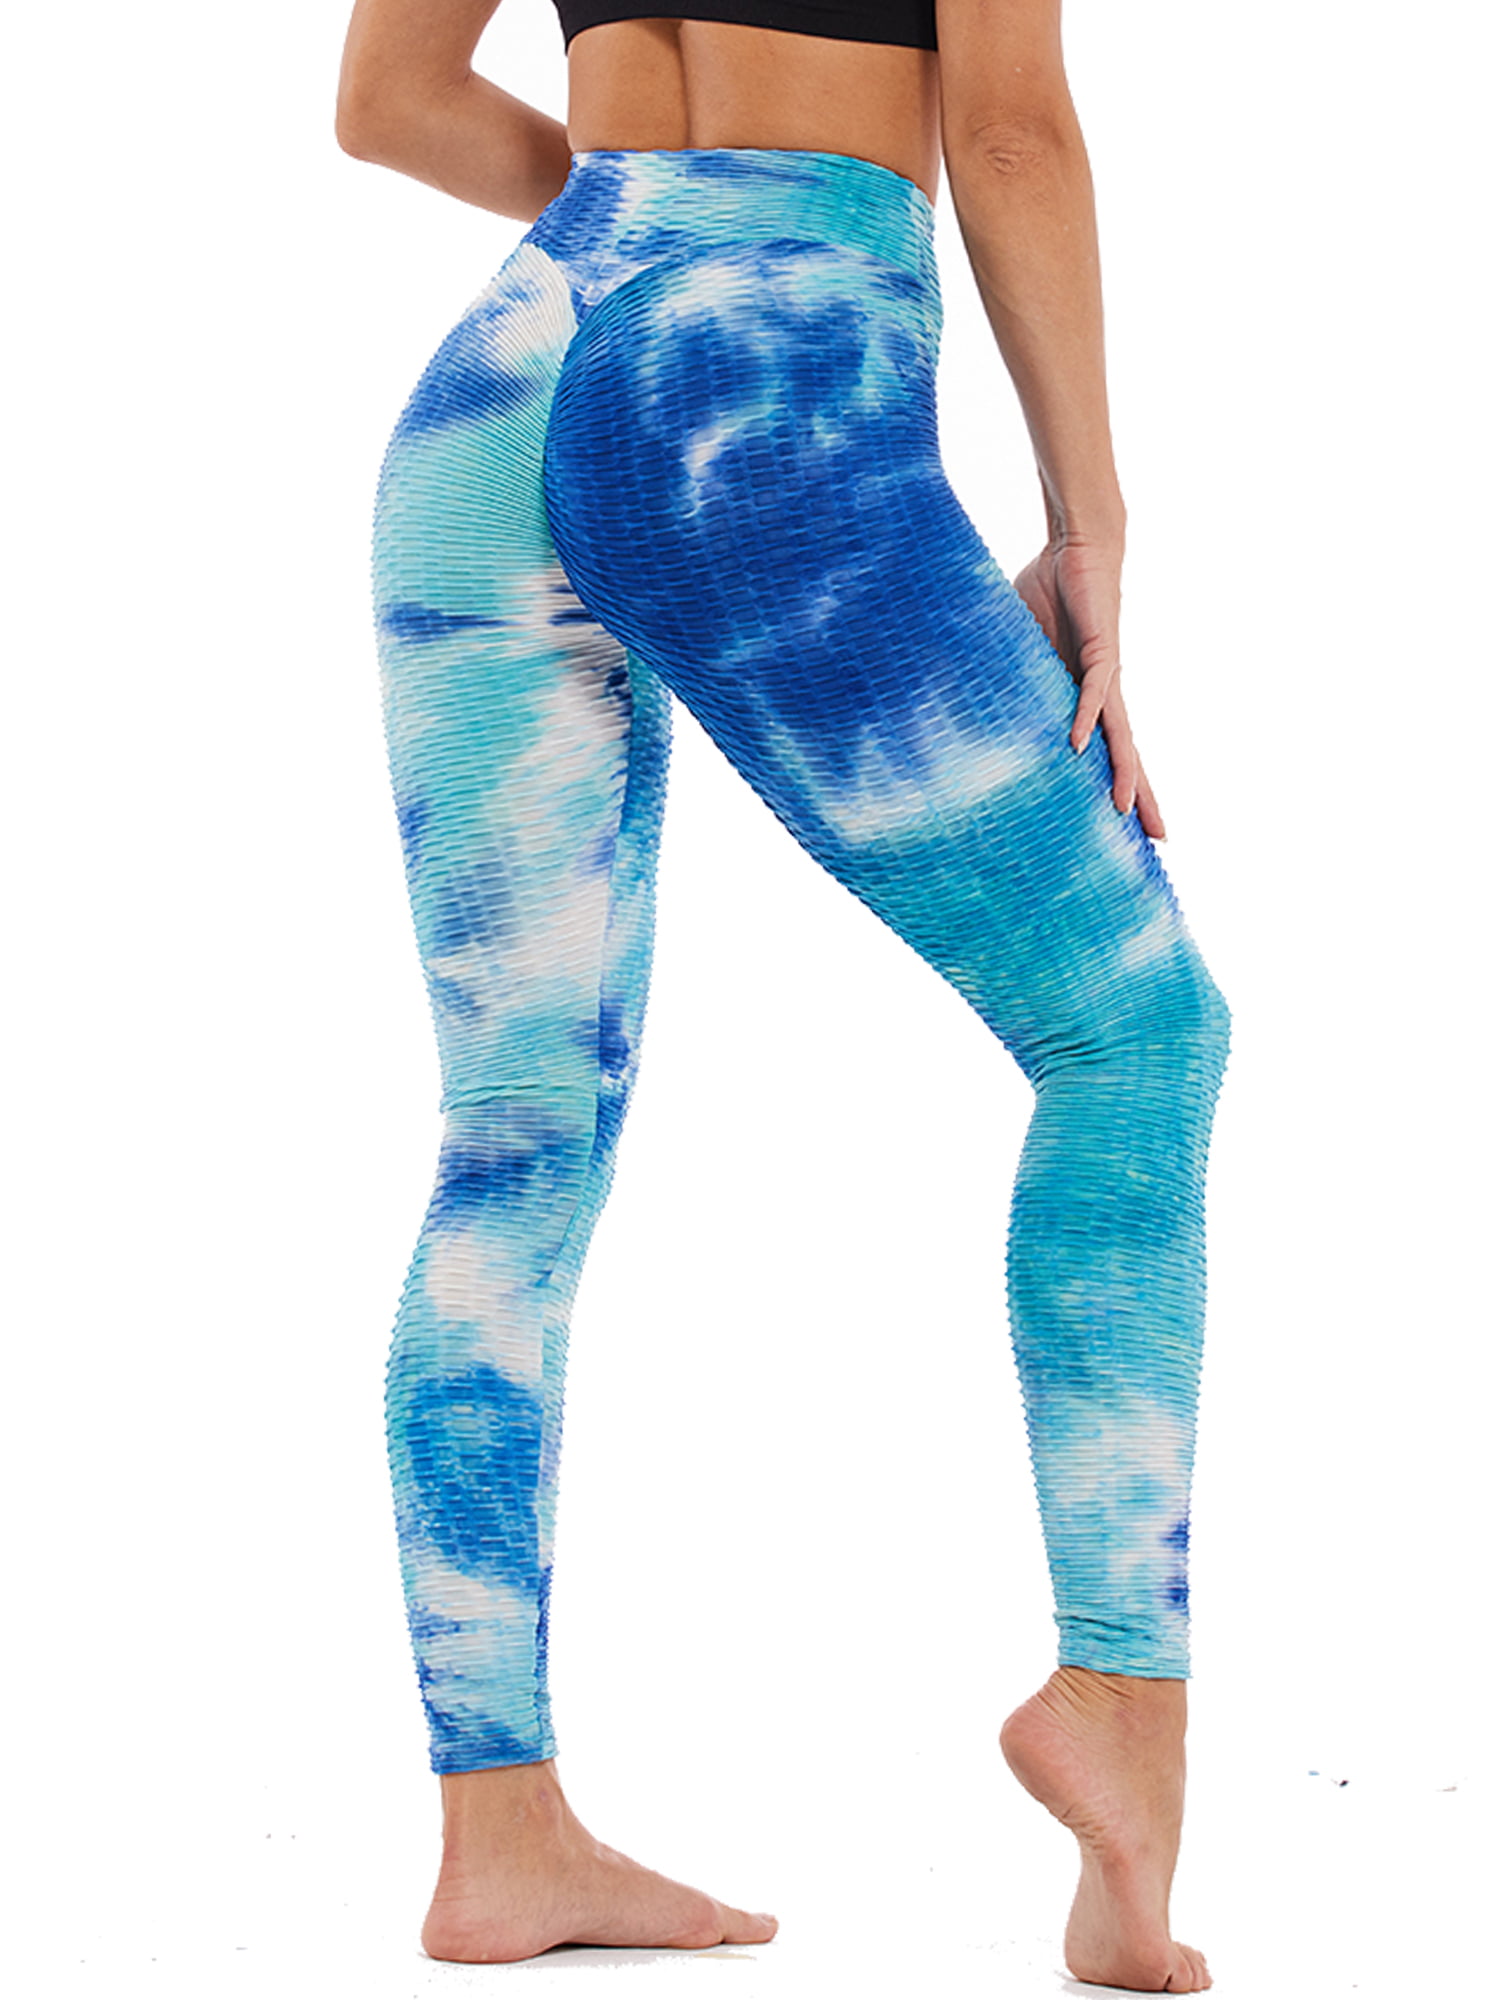 Women's Scrunched Workout Leggings Textured Tie Dye Booty Yoga Pants ...